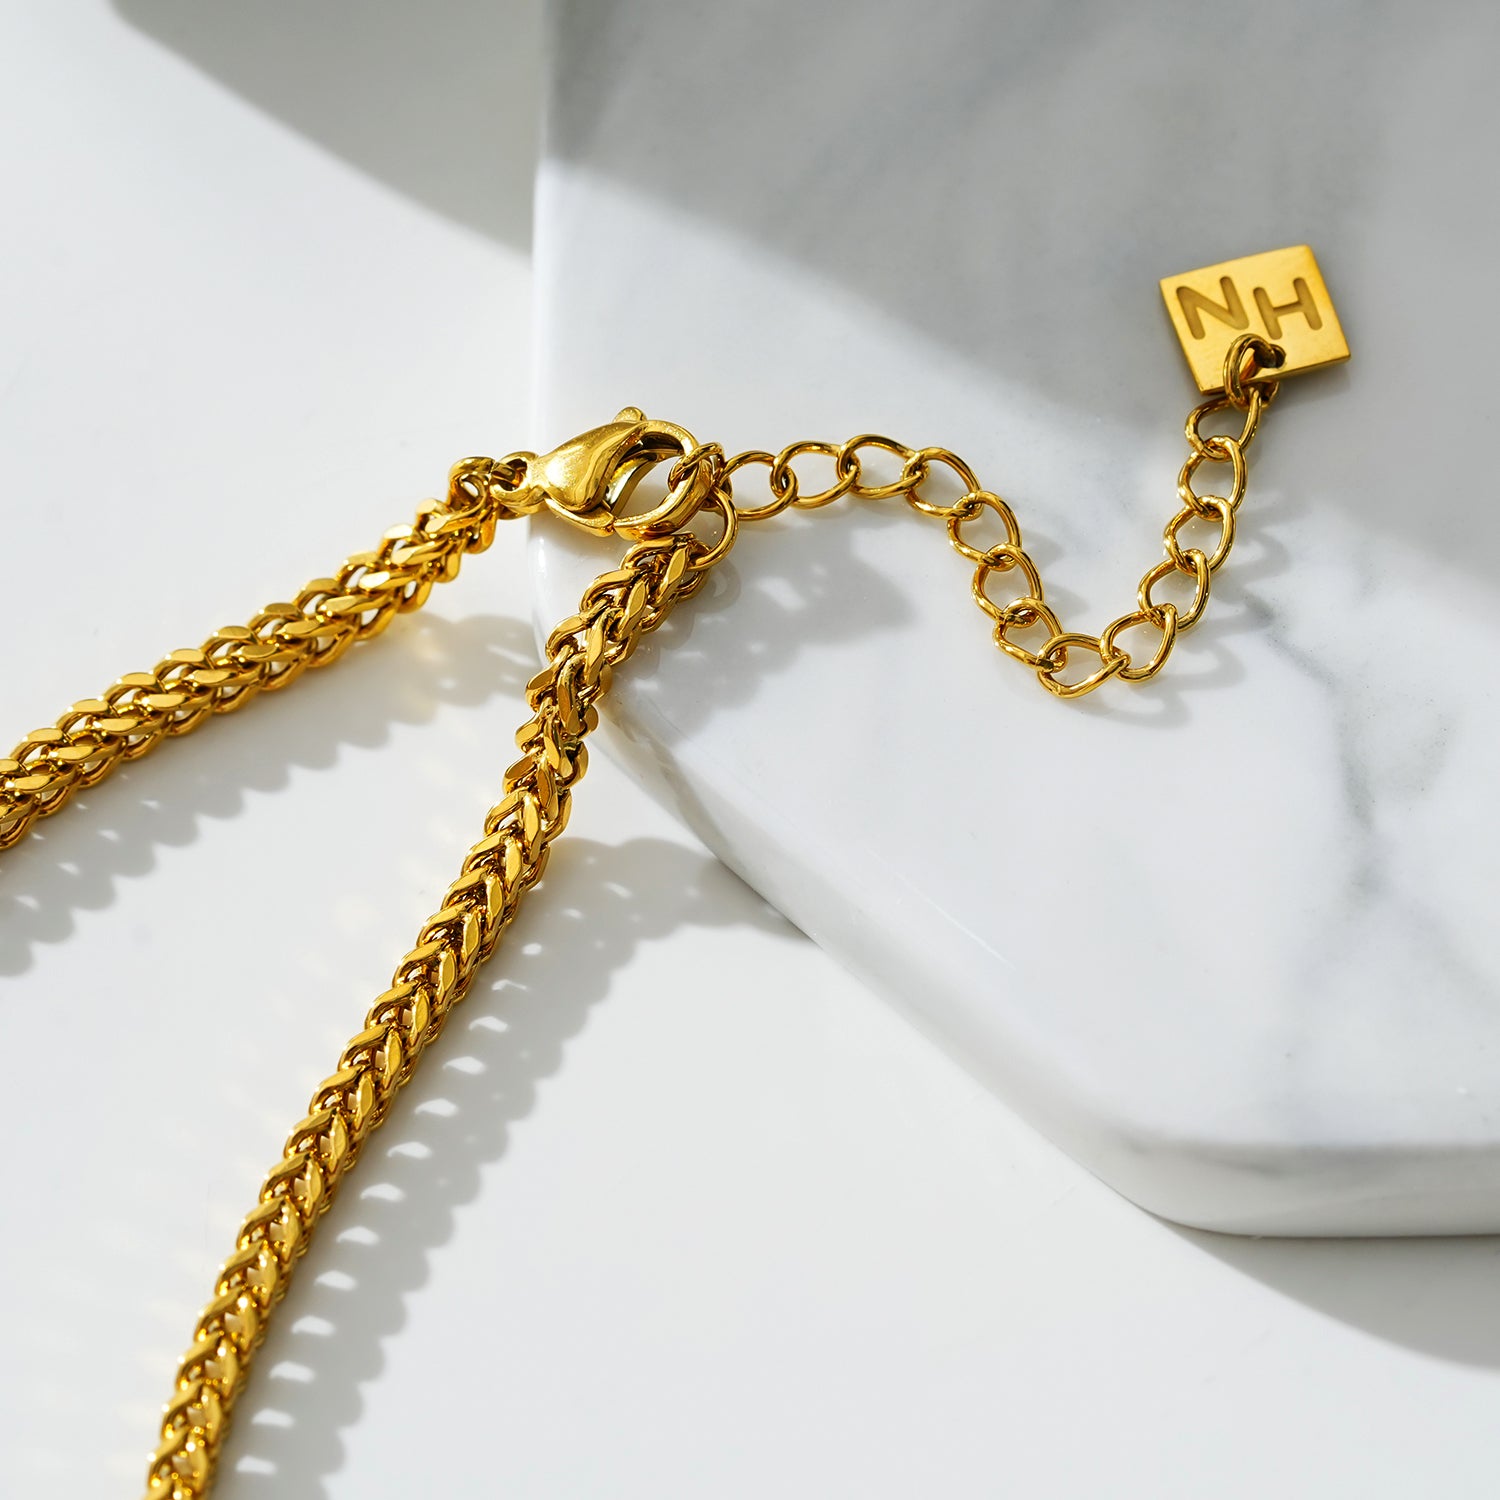 Style BRIELLA LG 9471G: Cuban Link Chain Gold Anklet.